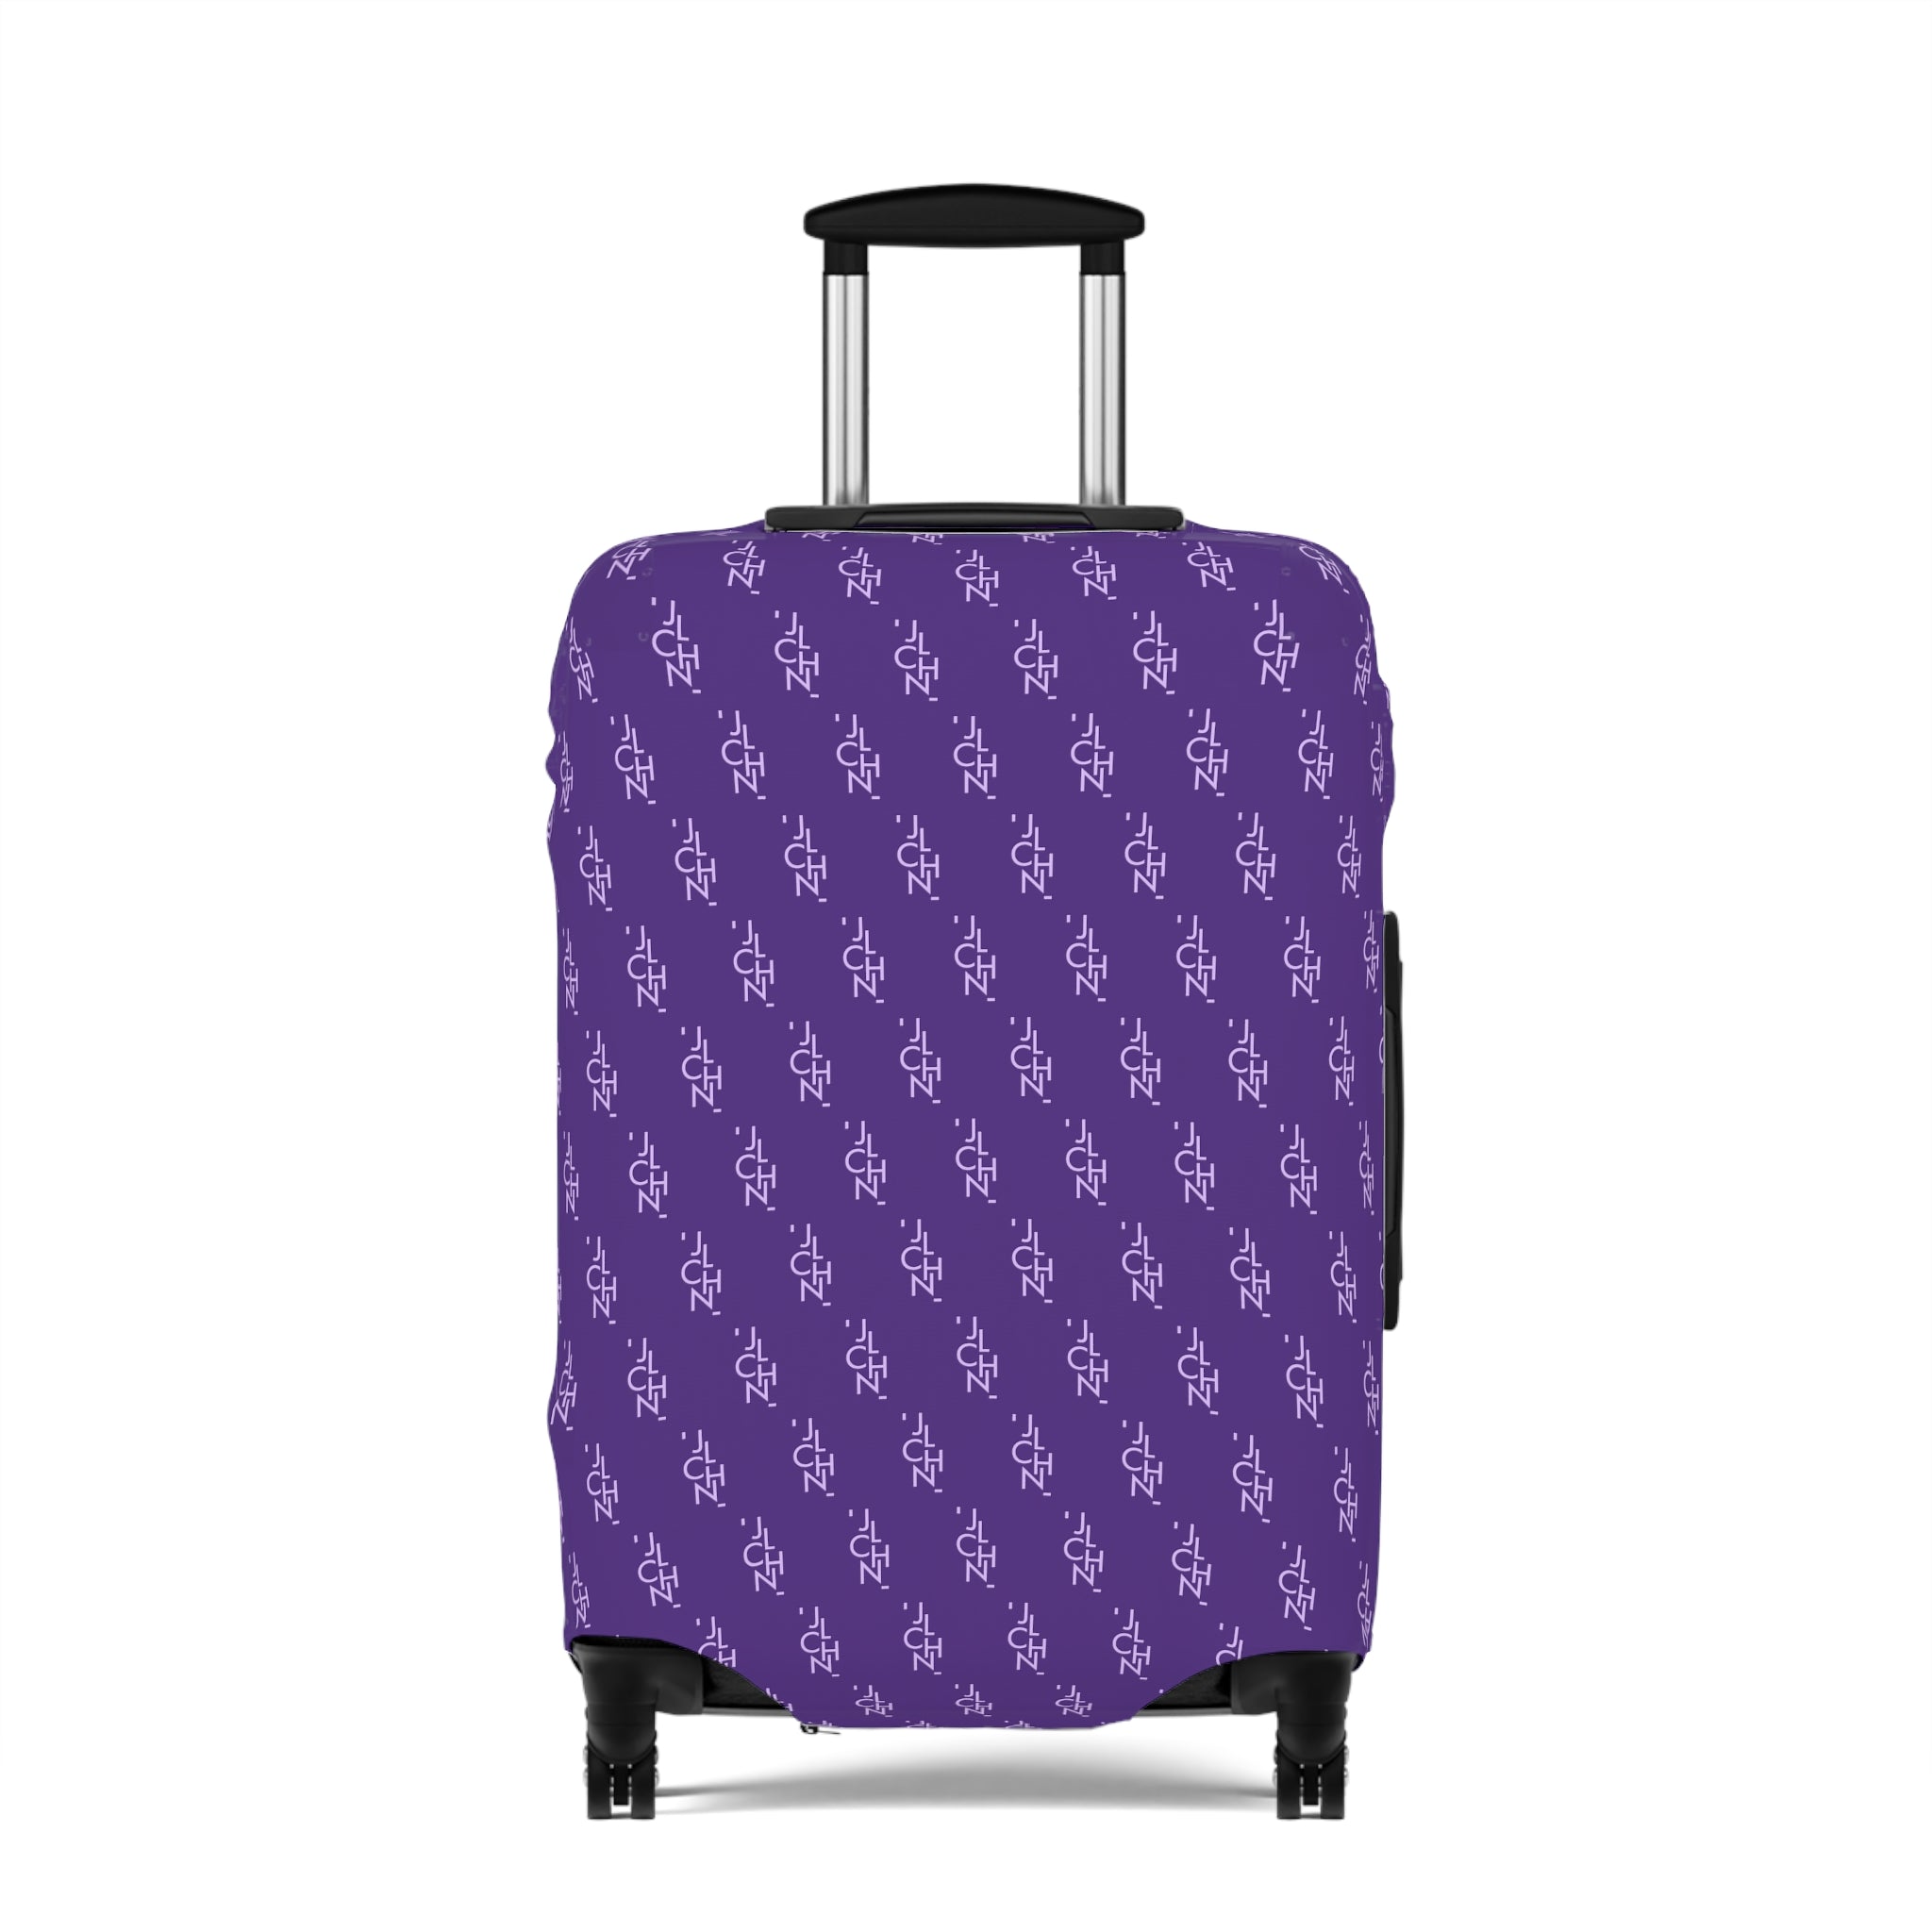 Travel in Juli Style: Purple Luggage Cover with JLCHN Legendary Pattern Logo